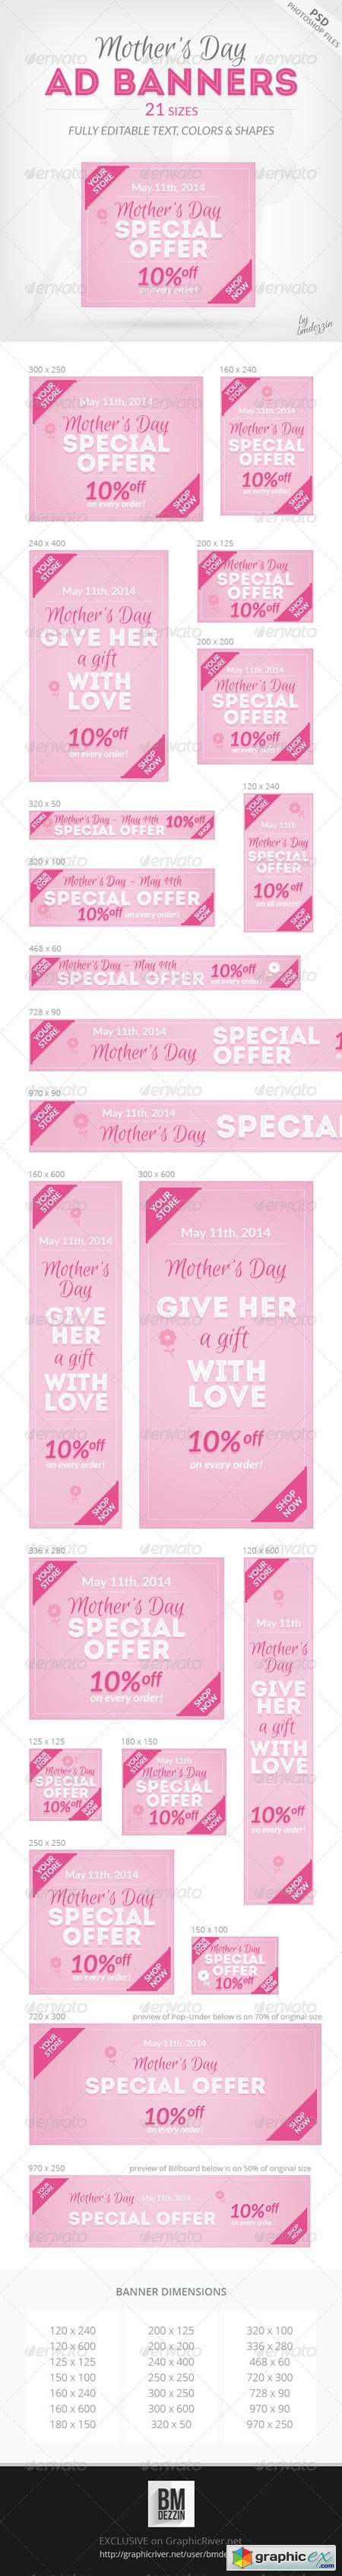 Mothers Day Ad Banners 7655007